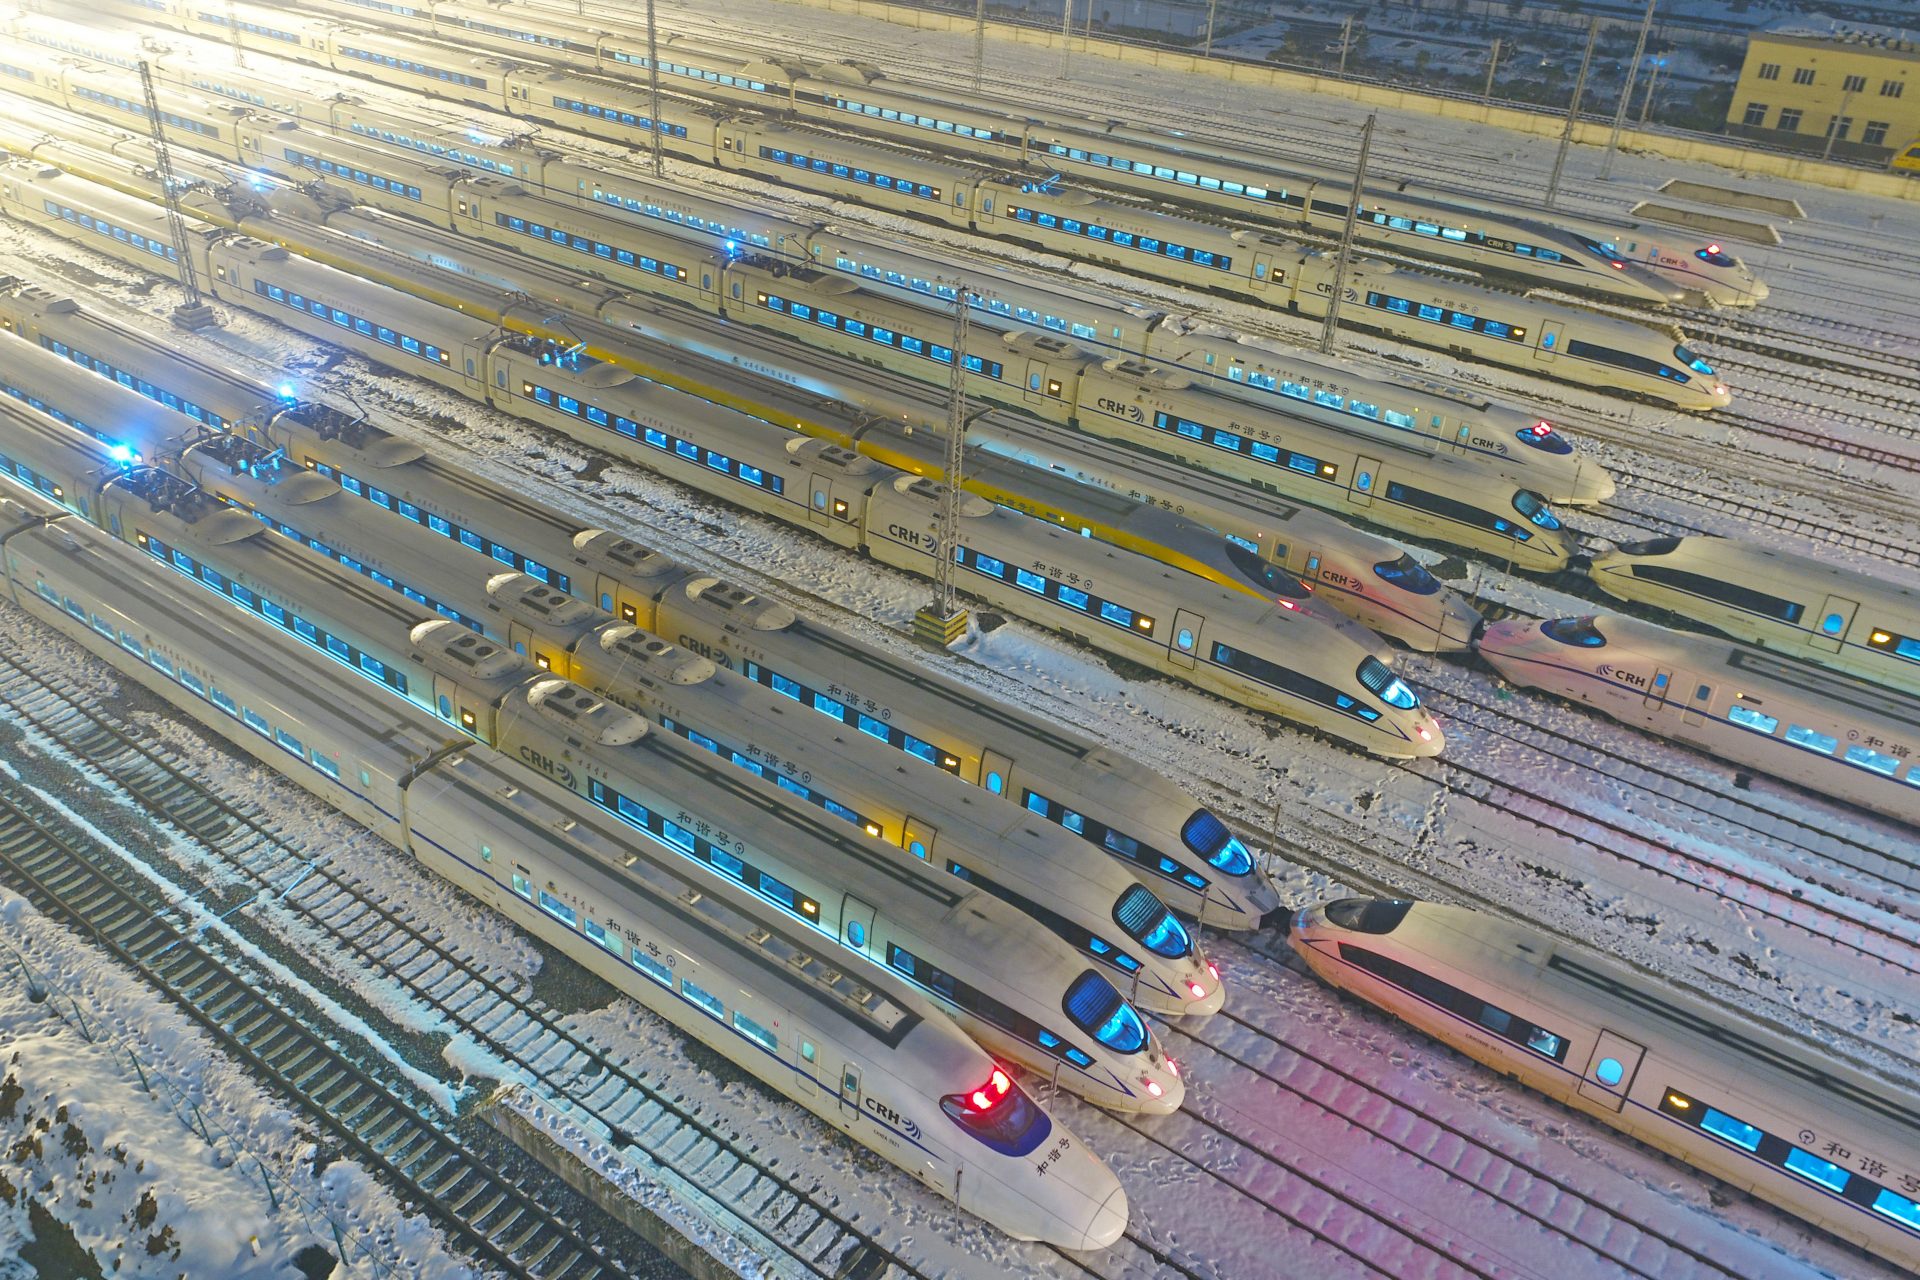 <p>In the 1980s, developing high-speed and high-capacity railways became a priority in Europe and Asia. Since then, hundreds of billions of dollars have been invested into creating new railways that offer travel at once unthinkable speeds.</p>